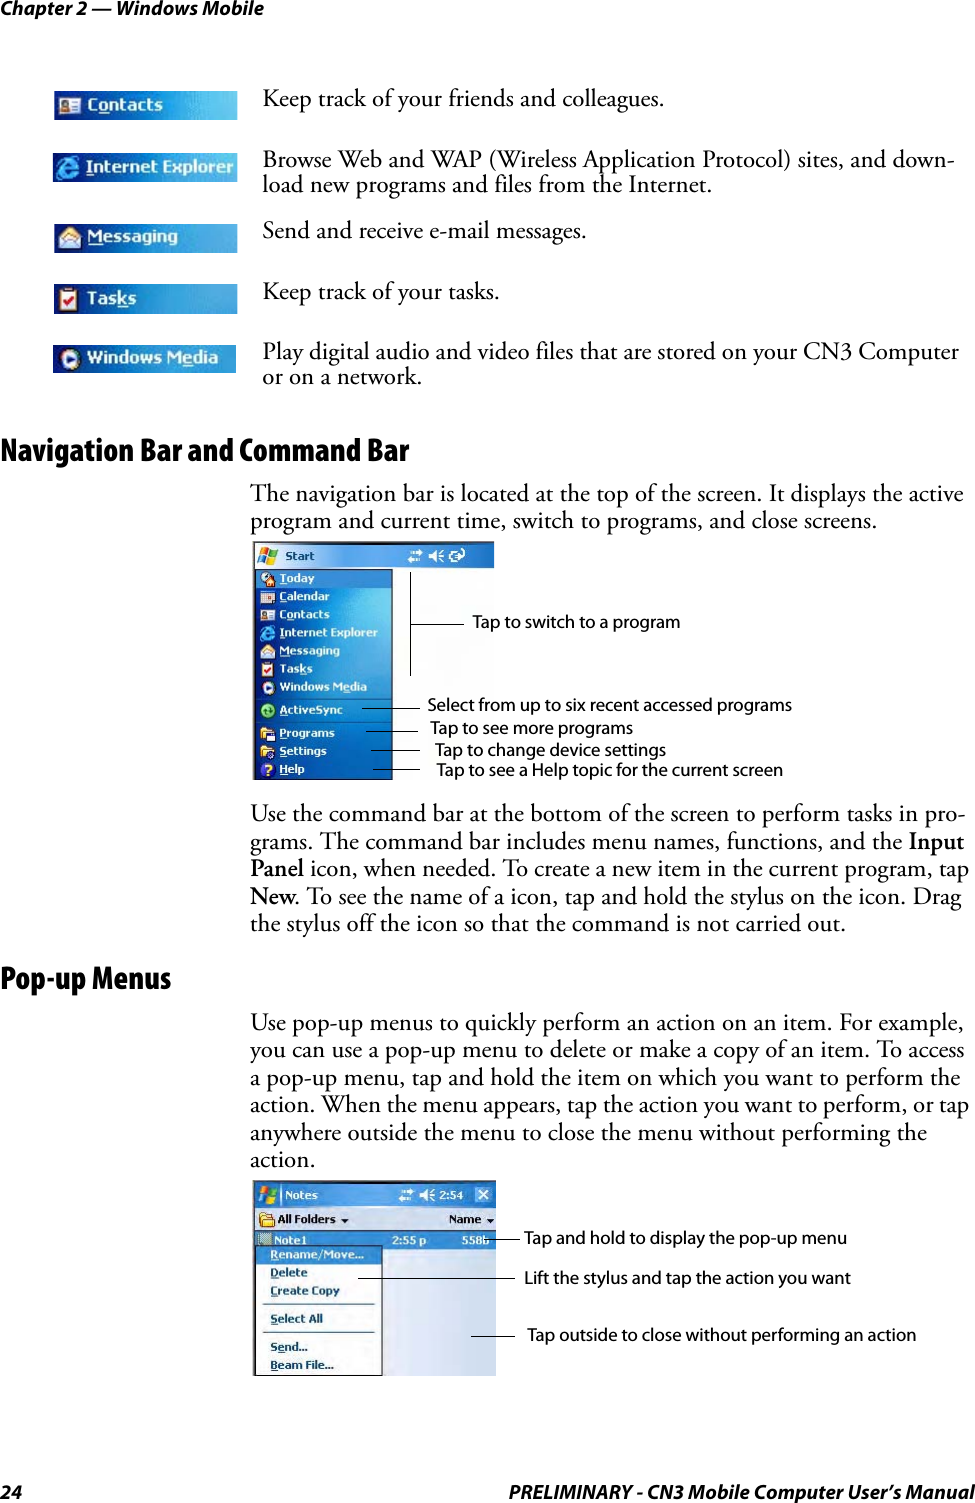 Chapter 2 — Windows Mobile24 PRELIMINARY - CN3 Mobile Computer User’s ManualNavigation Bar and Command BarThe navigation bar is located at the top of the screen. It displays the active program and current time, switch to programs, and close screens.Use the command bar at the bottom of the screen to perform tasks in pro-grams. The command bar includes menu names, functions, and the Input Panel icon, when needed. To create a new item in the current program, tap New. To see the name of a icon, tap and hold the stylus on the icon. Drag the stylus off the icon so that the command is not carried out.Pop-up MenusUse pop-up menus to quickly perform an action on an item. For example, you can use a pop-up menu to delete or make a copy of an item. To access a pop-up menu, tap and hold the item on which you want to perform the action. When the menu appears, tap the action you want to perform, or tap anywhere outside the menu to close the menu without performing the action.Keep track of your friends and colleagues.Browse Web and WAP (Wireless Application Protocol) sites, and down-load new programs and files from the Internet.Send and receive e-mail messages.Keep track of your tasks.Play digital audio and video files that are stored on your CN3 Computer or on a network.Tap to switch to a programTap to see more programsTap to change device settingsTap to see a Help topic for the current screenSelect from up to six recent accessed programsTap and hold to display the pop-up menuLift the stylus and tap the action you wantTap outside to close without performing an action